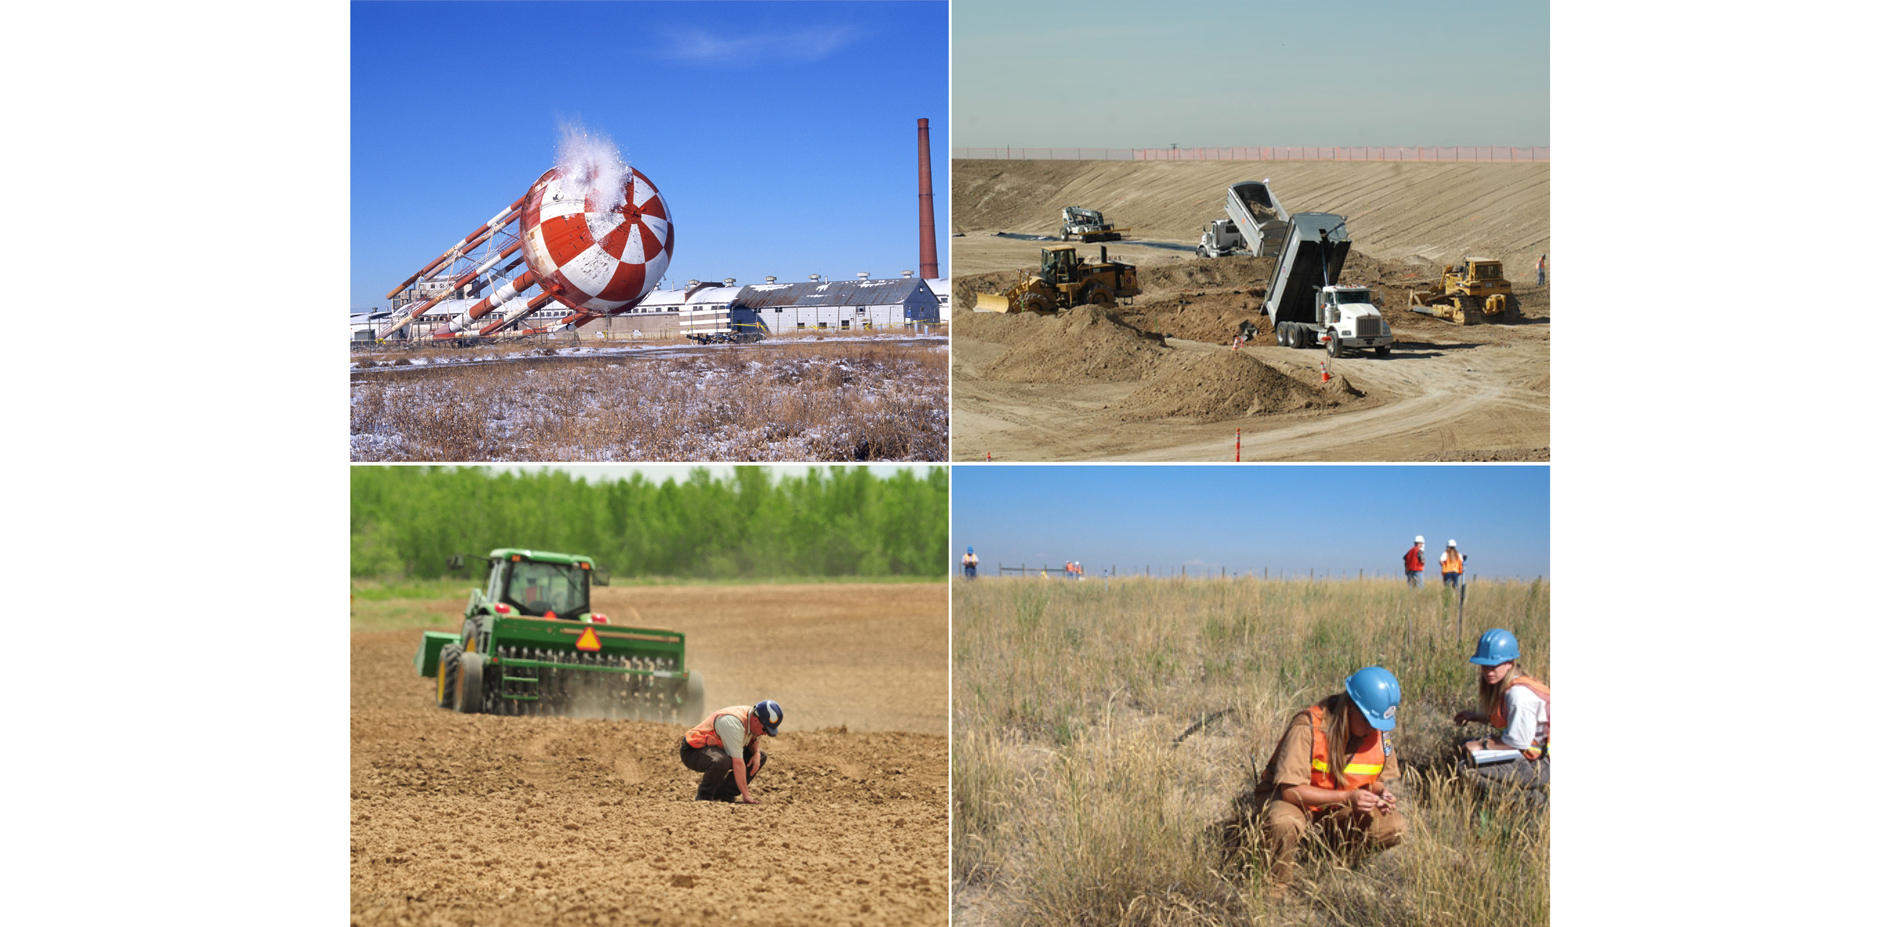 Phase I, completed from 1996-1999, entailed prairie restoration, building demolition, road demolition, remote information facilities, an outdoor class…